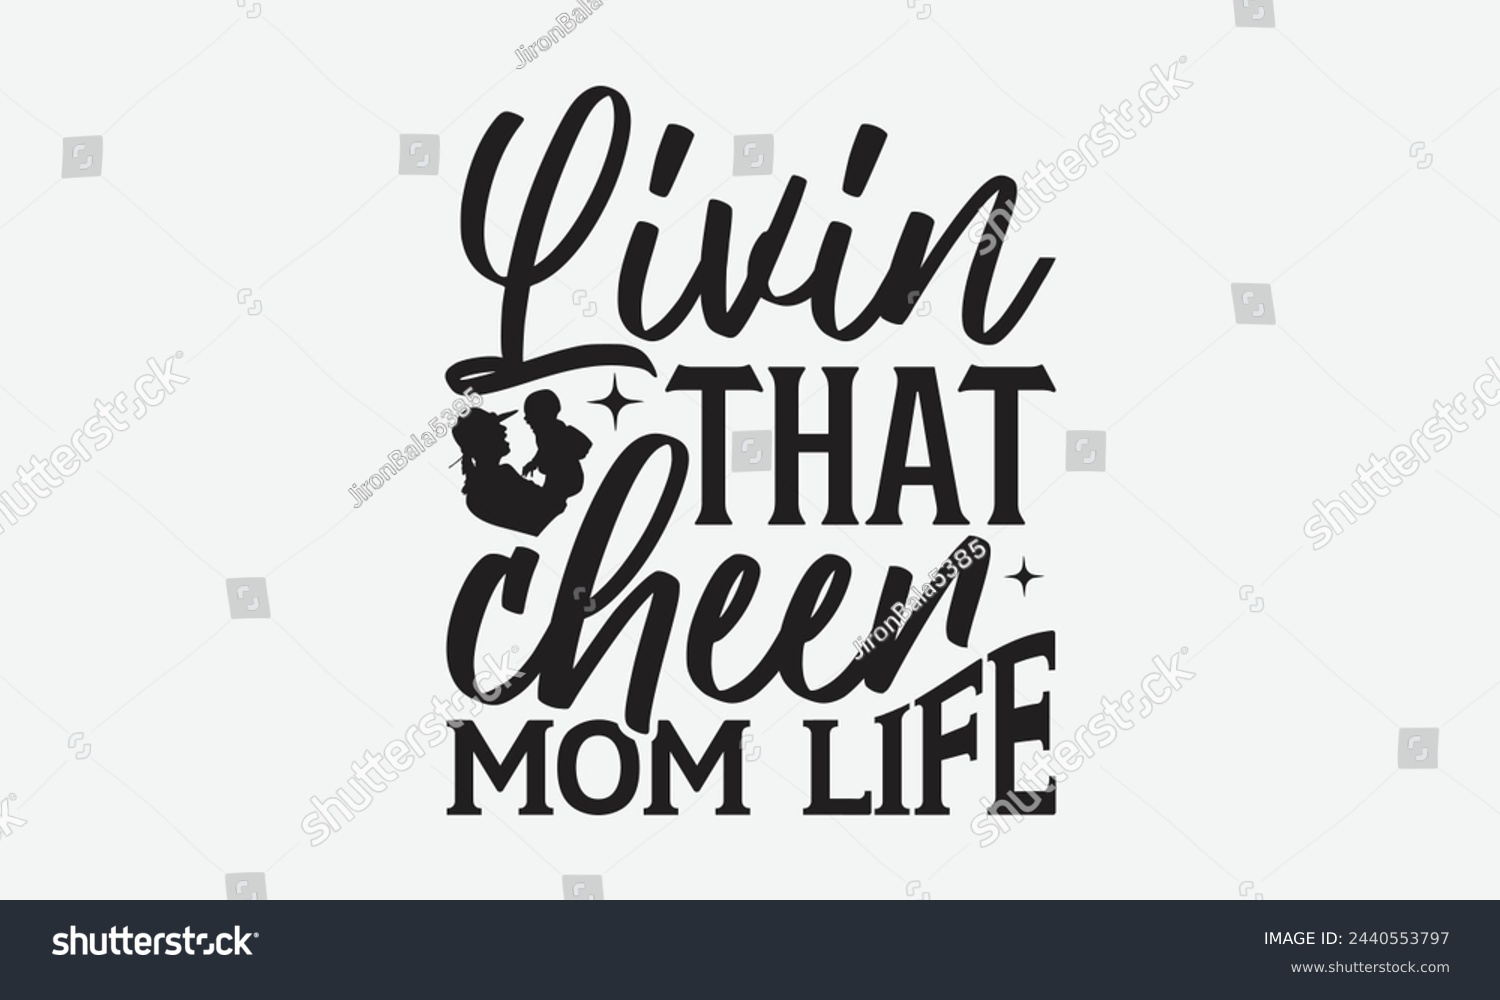 SVG of Livin that cheer mom life - Mom t-shirt design, isolated on white background, this illustration can be used as a print on t-shirts and bags, cover book, template, stationary or as a poster. svg